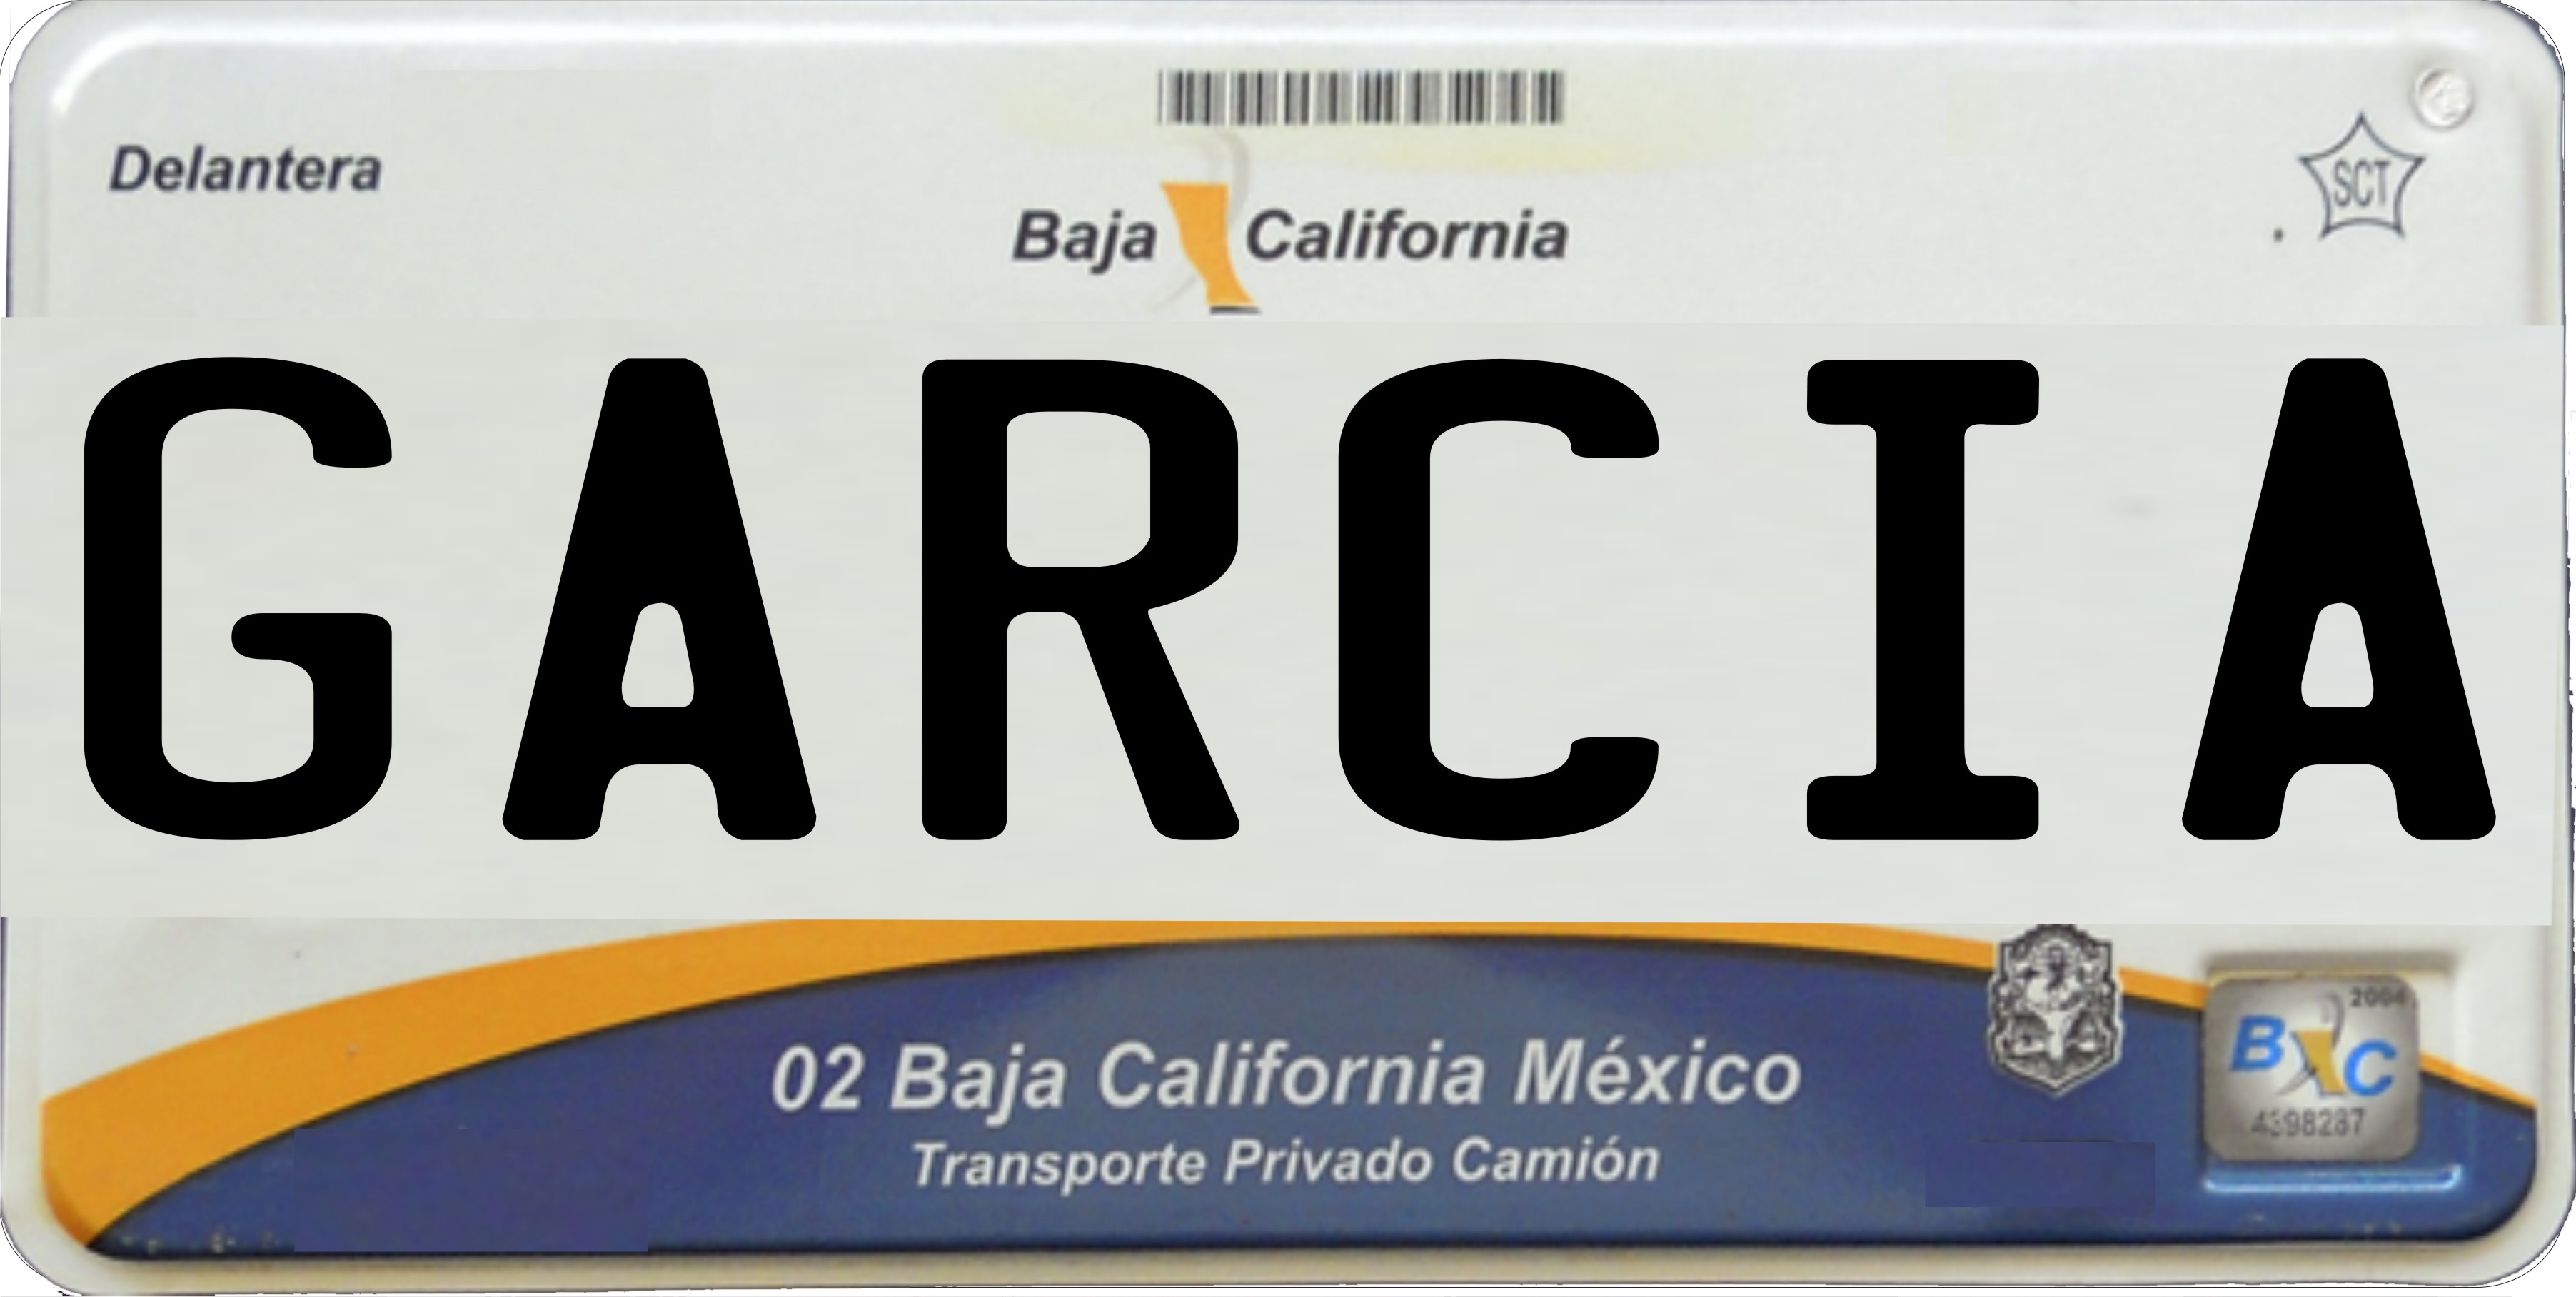 Mexico Baja California Photo LICENSE PLATE Free Personalization on this PLATE